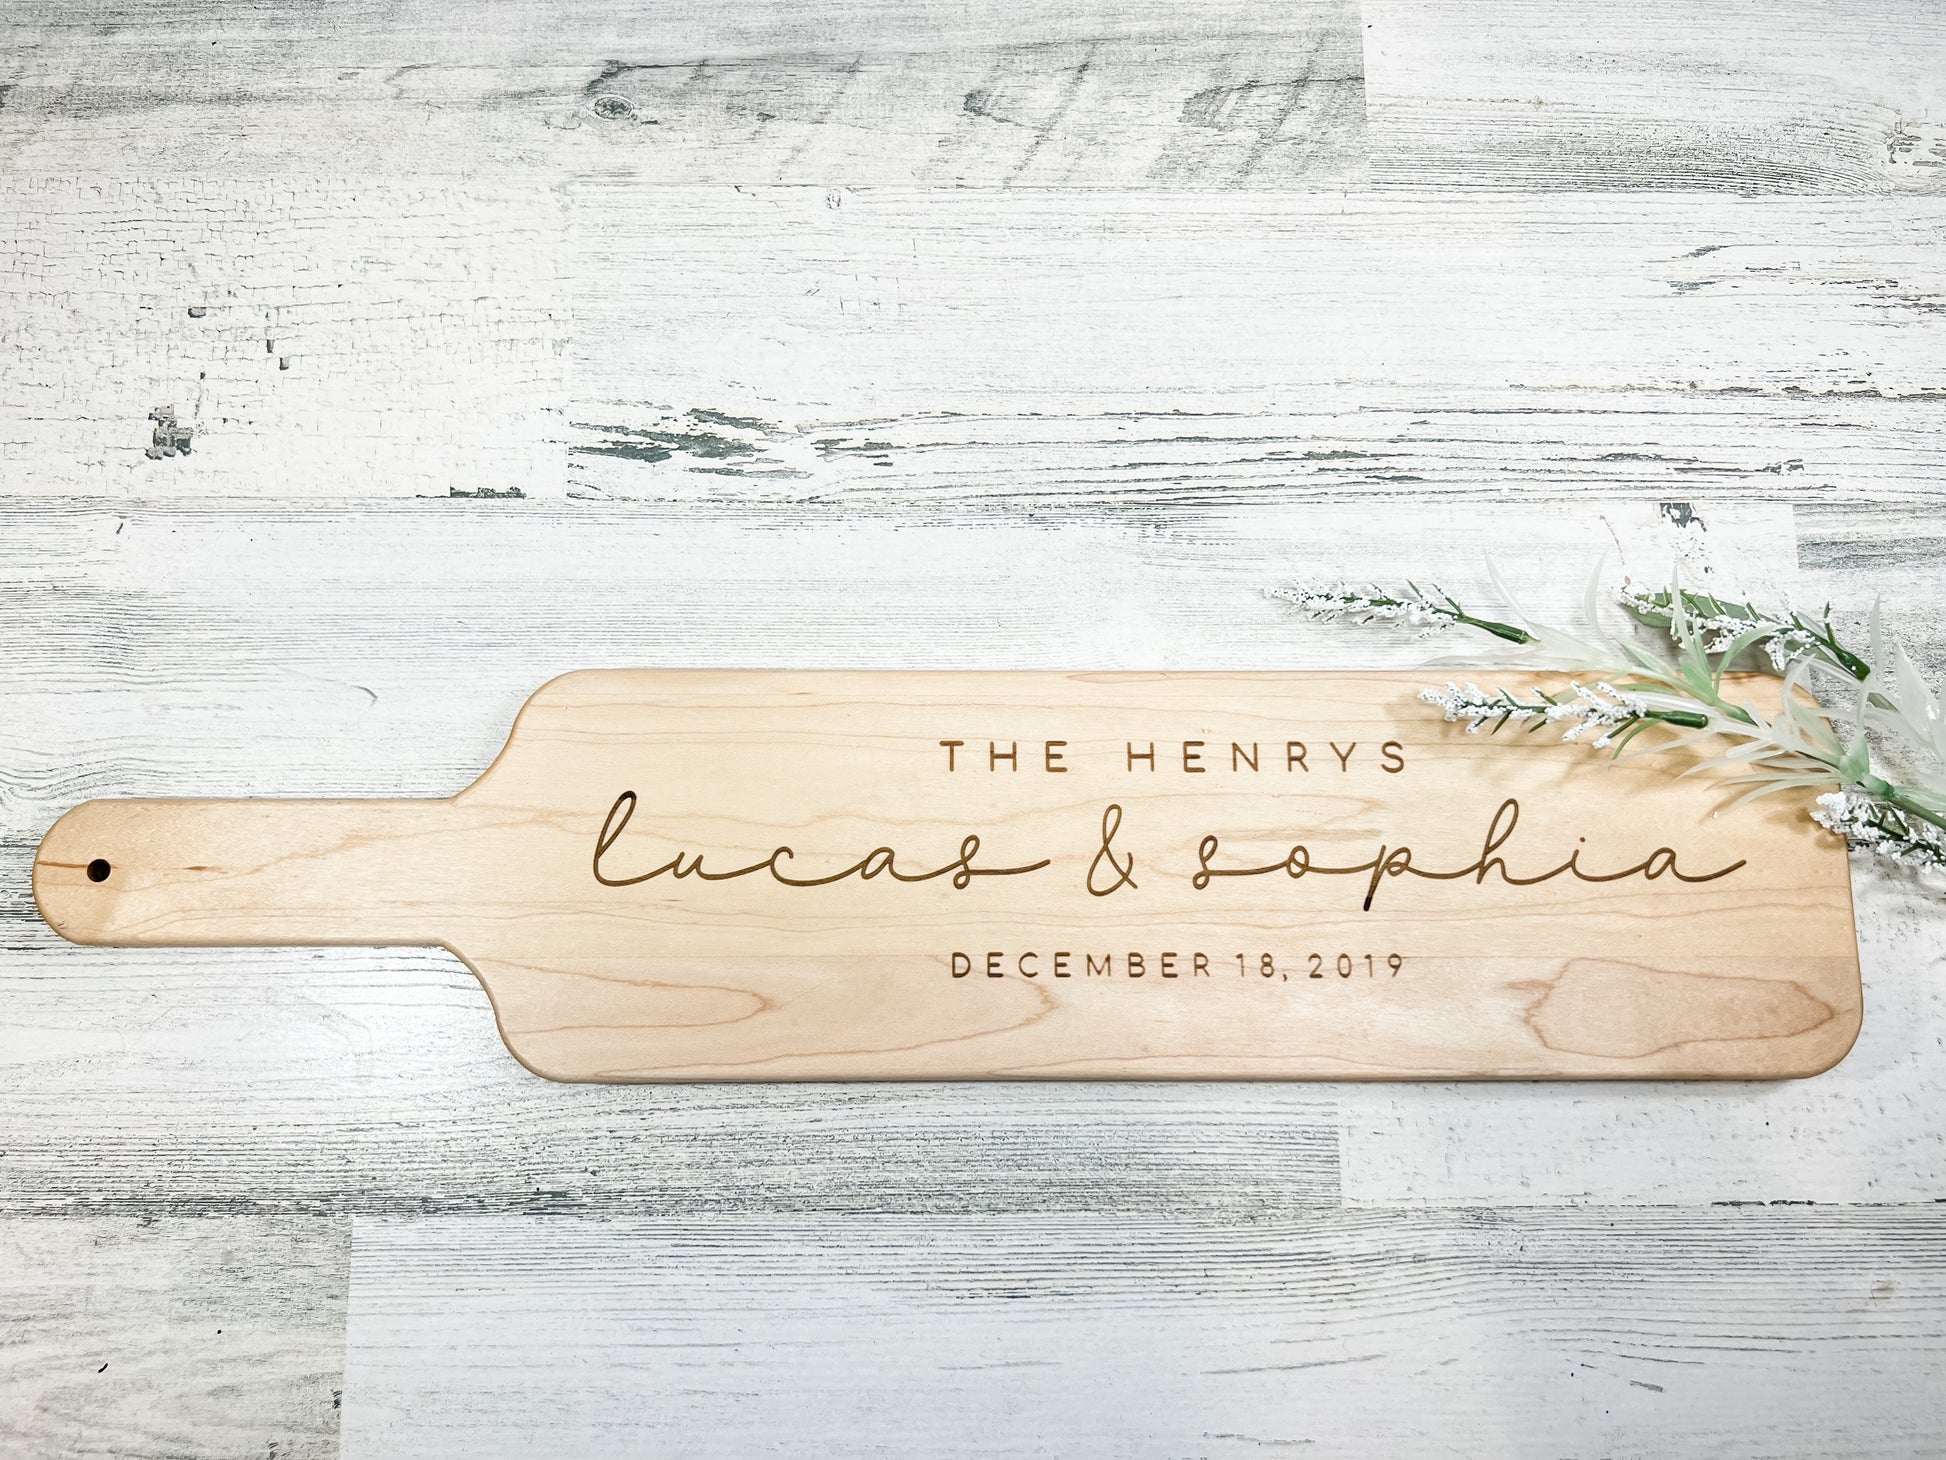 Couples Names with Date Cutting Board - B-Cozy Home Decor